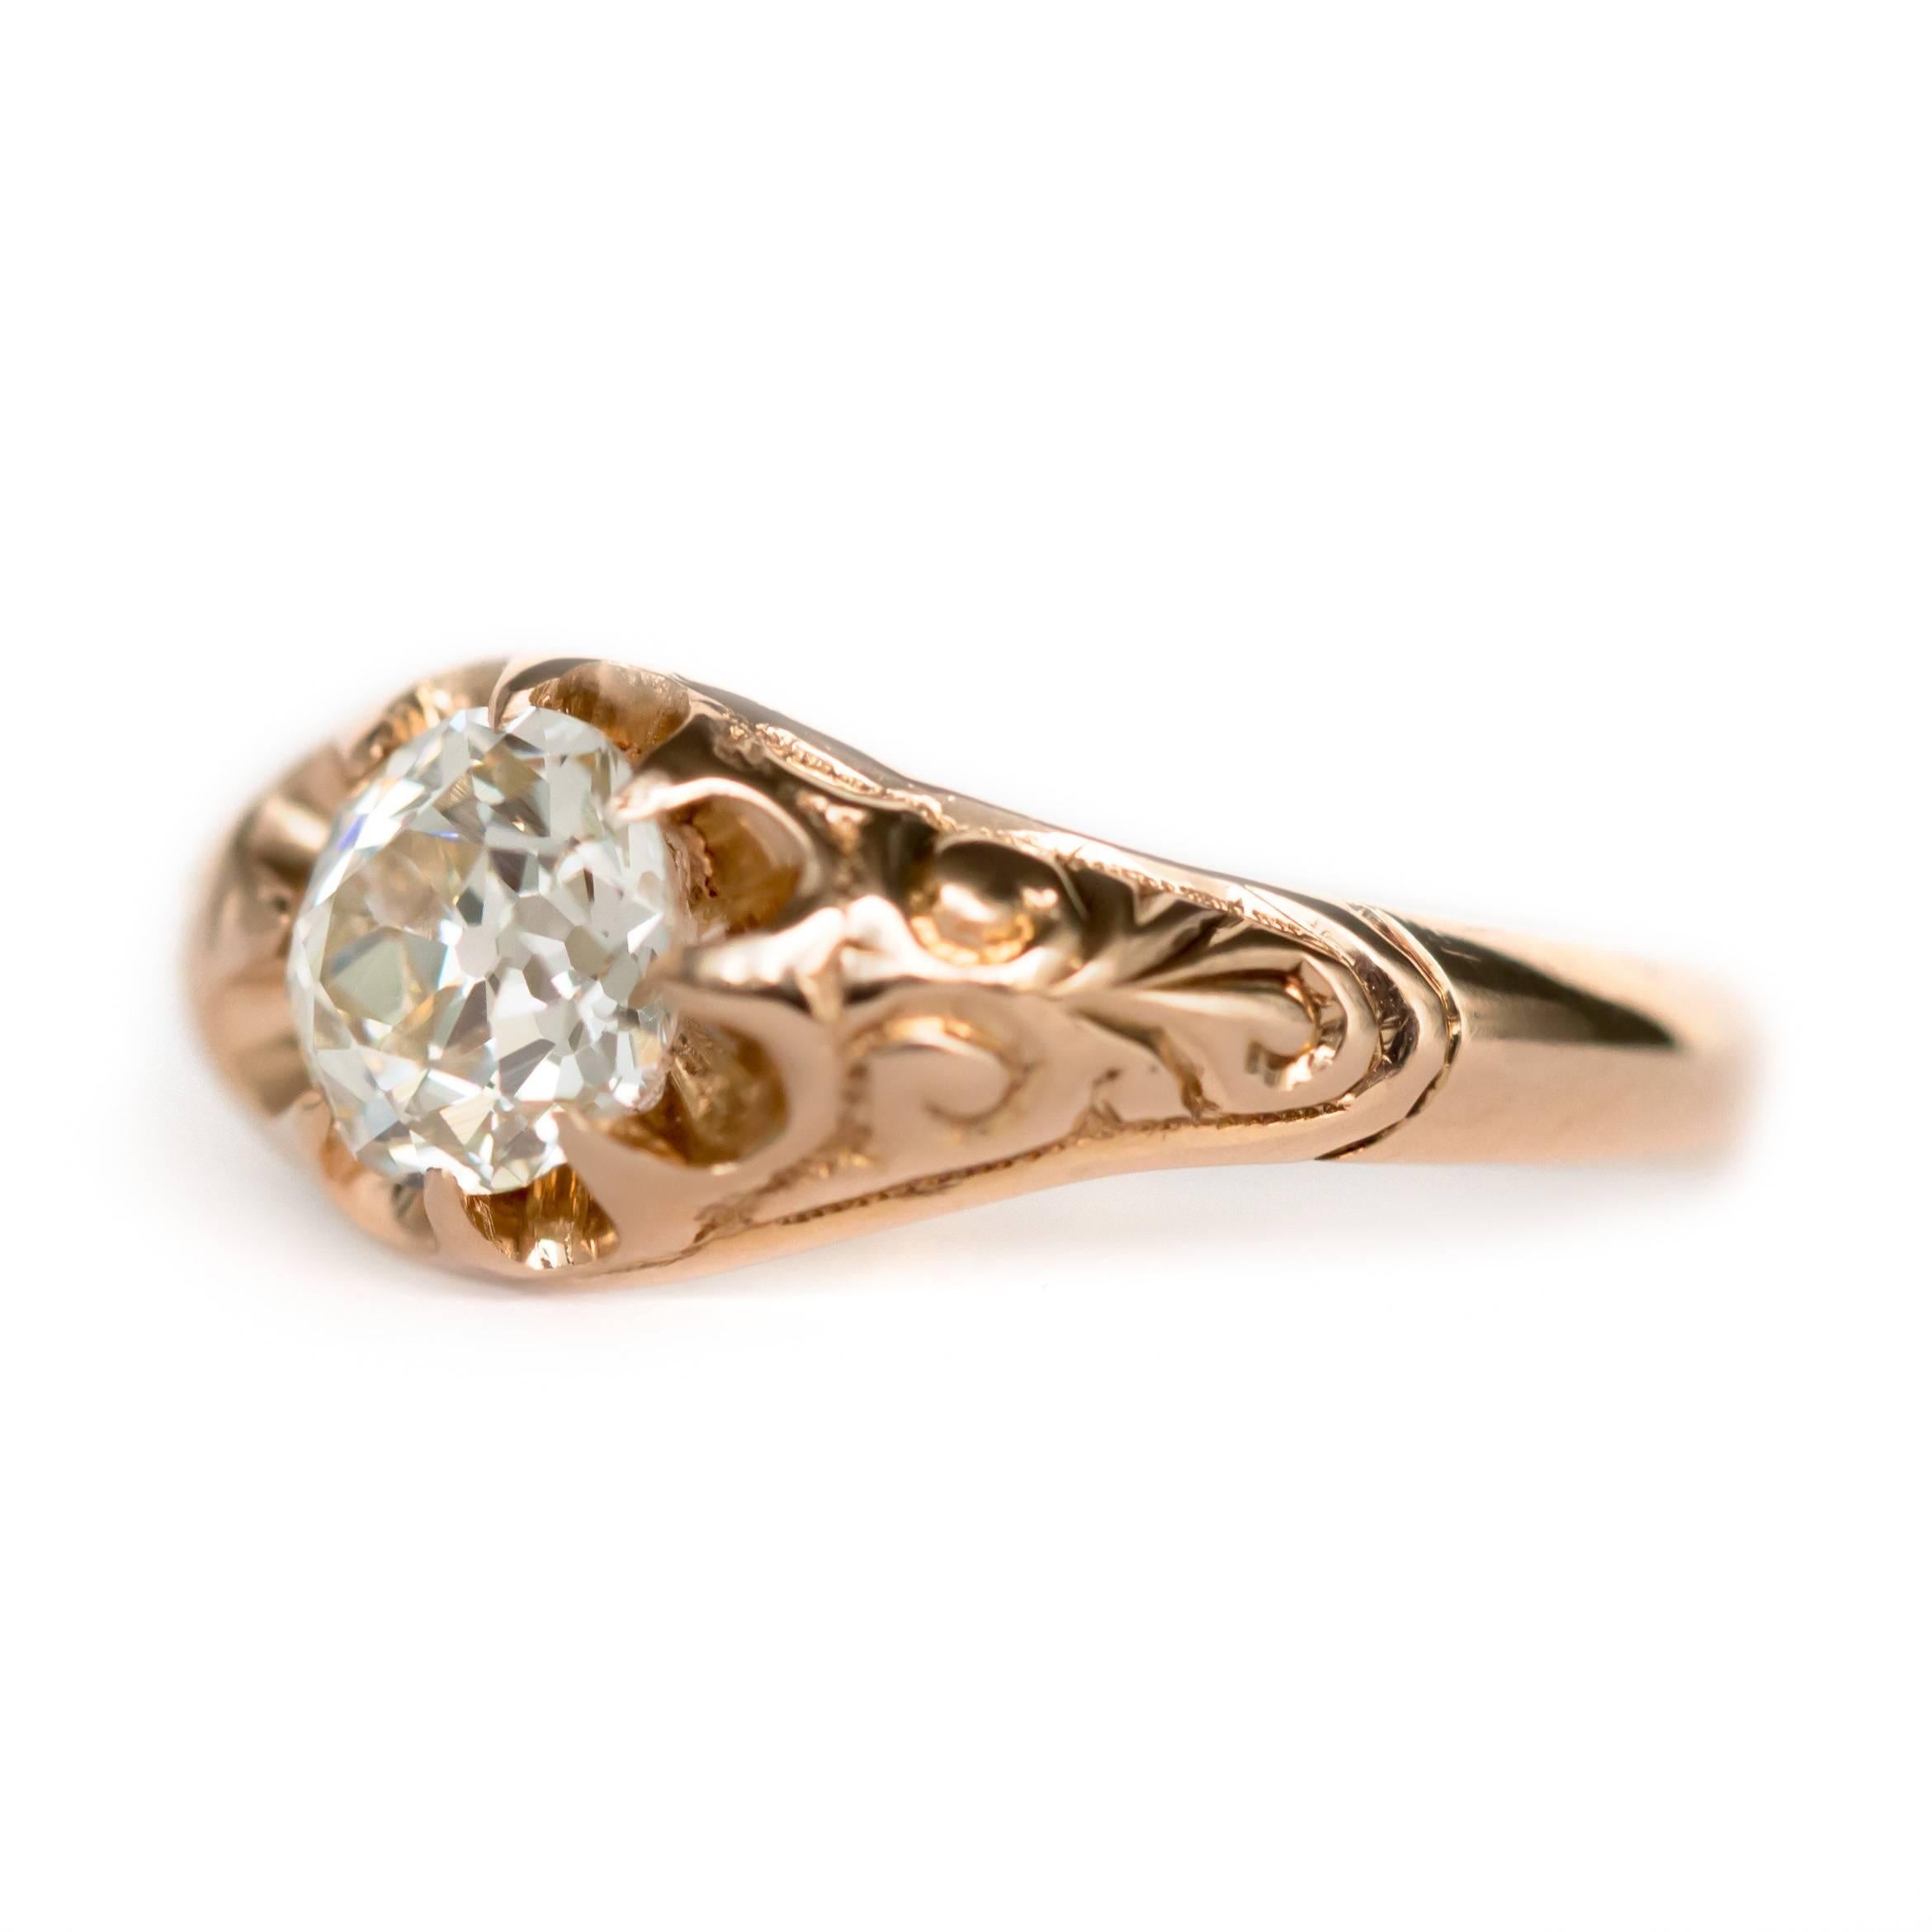 Item Details: 
Ring Size: Approximately 8.10
Metal Type: 14 Karat Yellow Gold
Weight: 3.2 grams

Center Diamond Details:
Shape: Antique Cushion
Carat Weight: .83 carat
Color: J
Clarity: VS1

Finger to Top of Stone Measurement: 3.24mm
